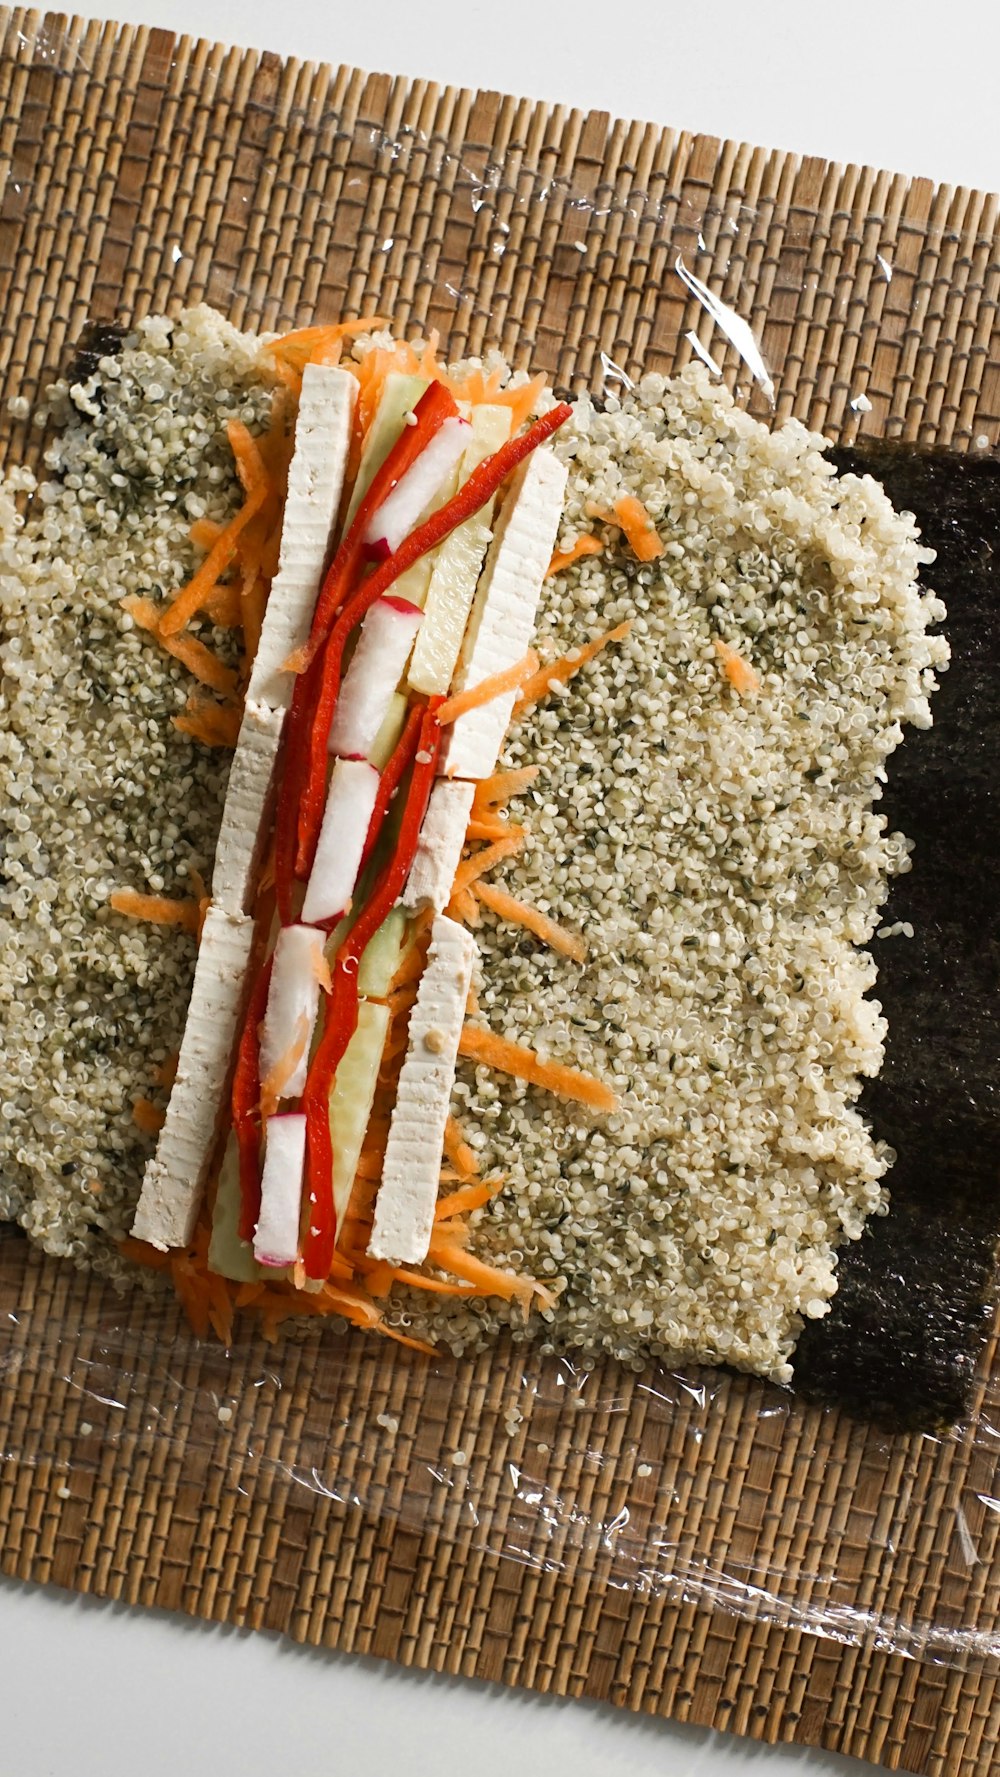 a sandwich with carrots, cheese, and lettuce